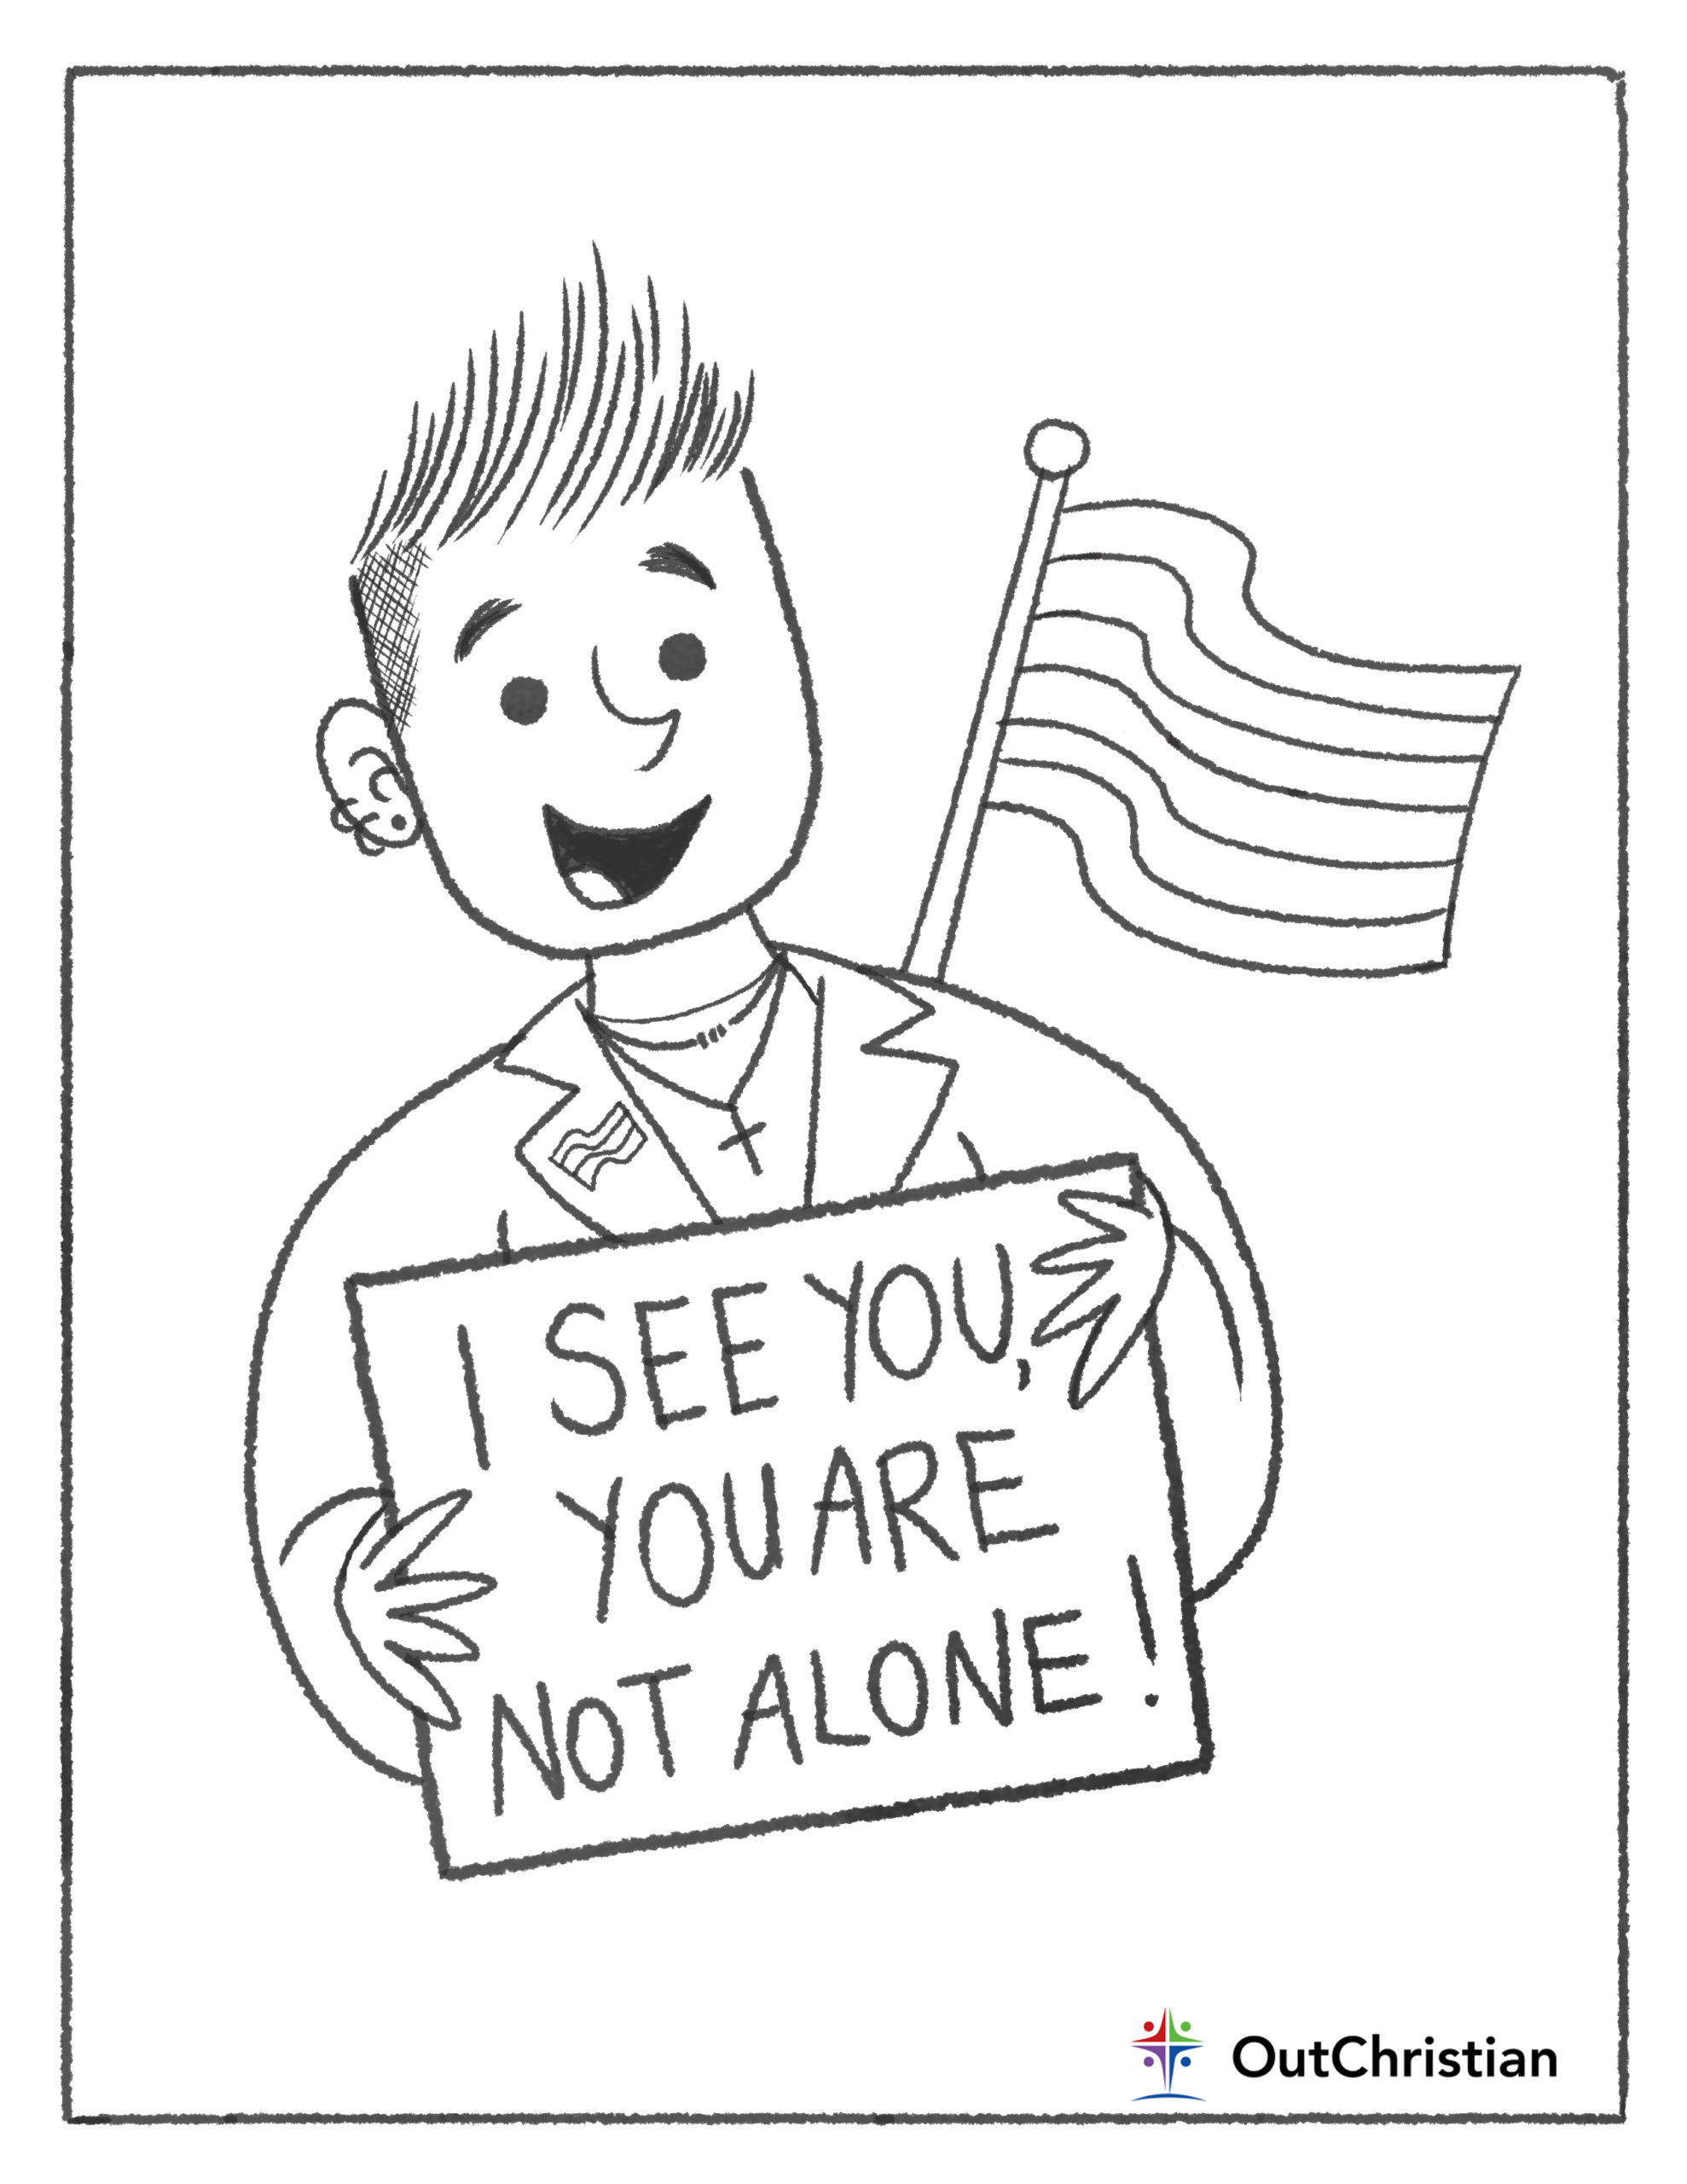 Have Some Fun With These LGBTQ Christian Coloring Pages - OutChristian